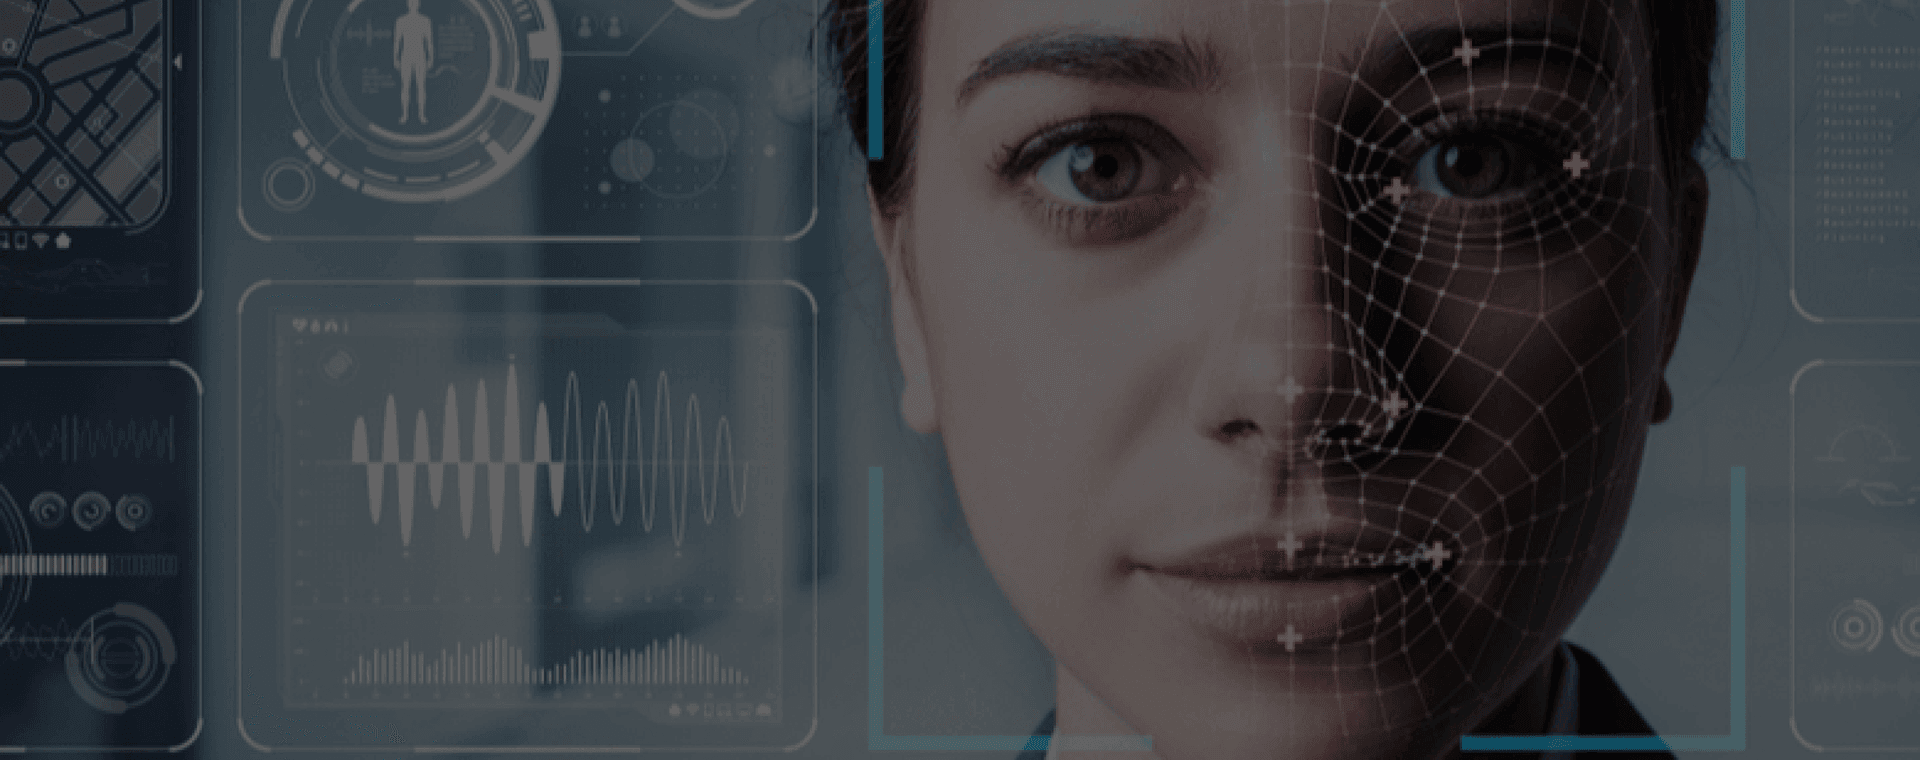 Facial Recognition:
Practical Applications for Physical Security